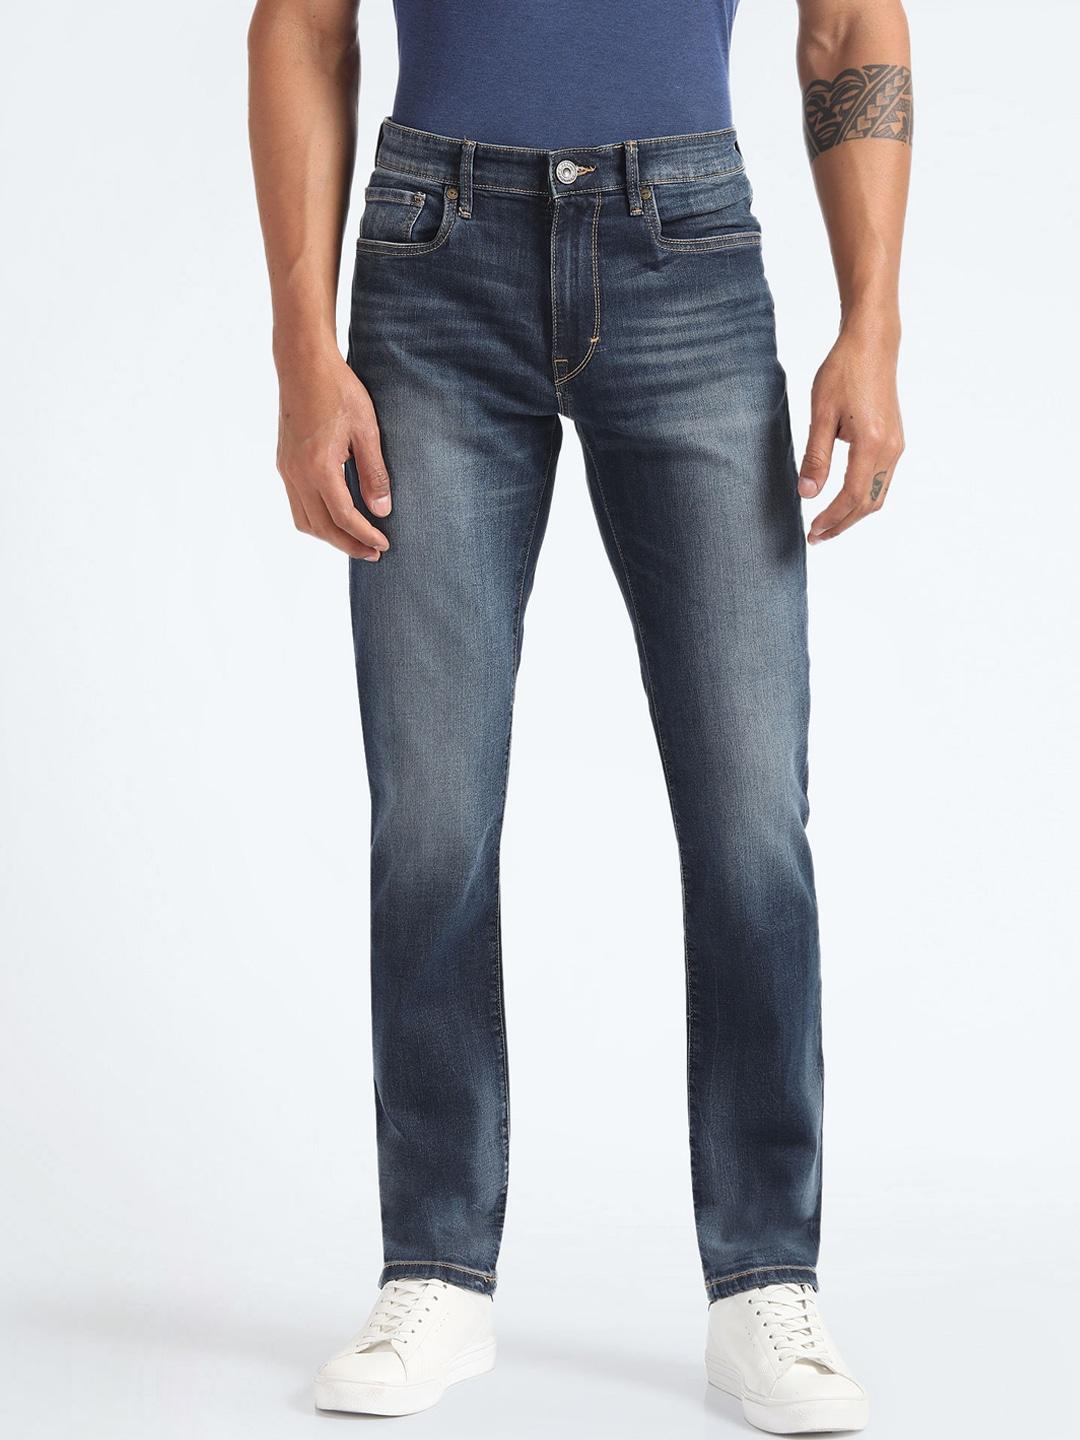 flying-machine-men-straight-fit-mid-rise-heavy-fade-stretchable-jeans